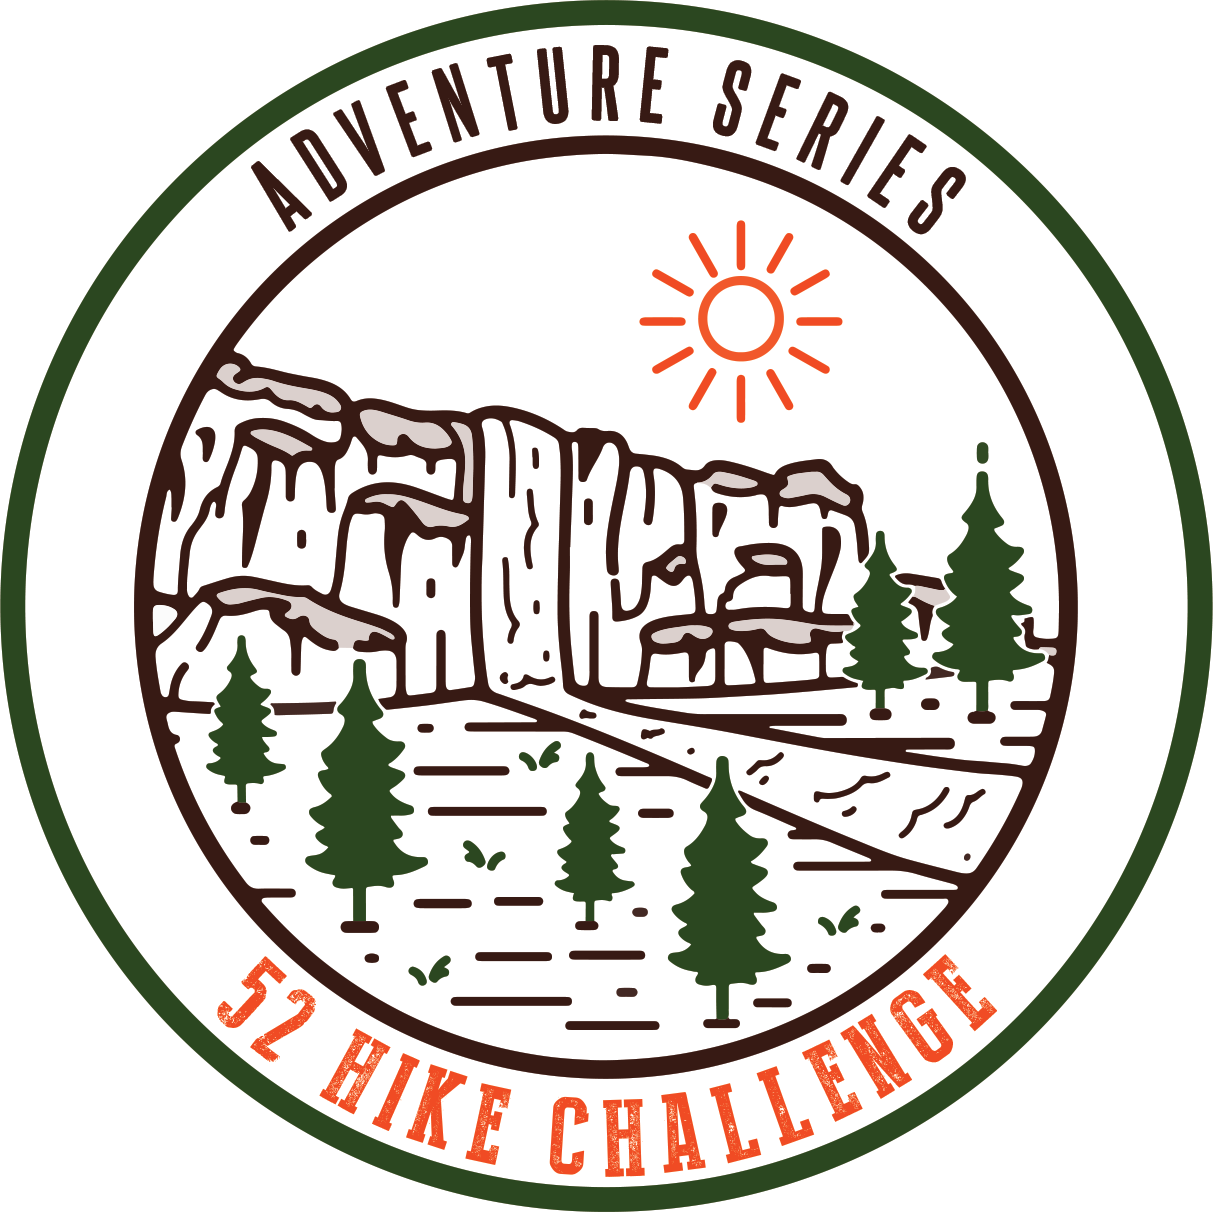 52 Hike Challenge Adventure Series Stickers Pack (2-Pack)